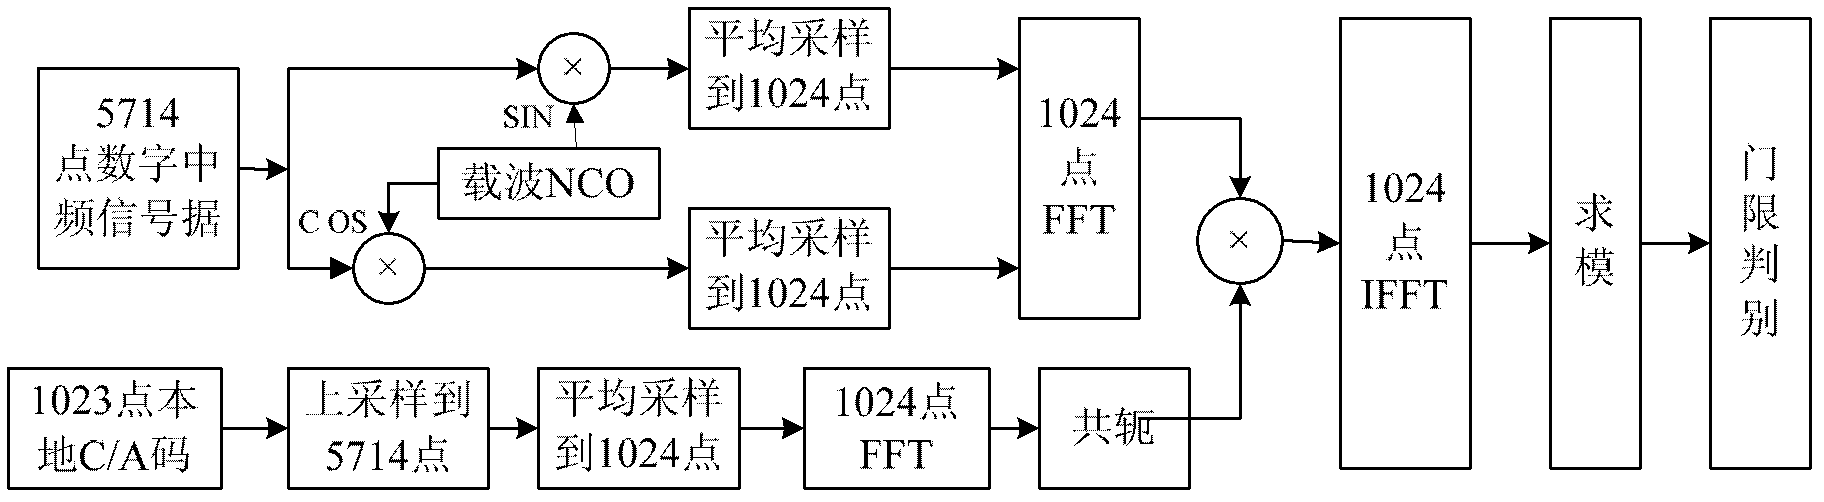 GPS (Global Positioning System) signal acquisition method based on FPGA (Field Programmable Gate Array) and GPS signal acquisition system